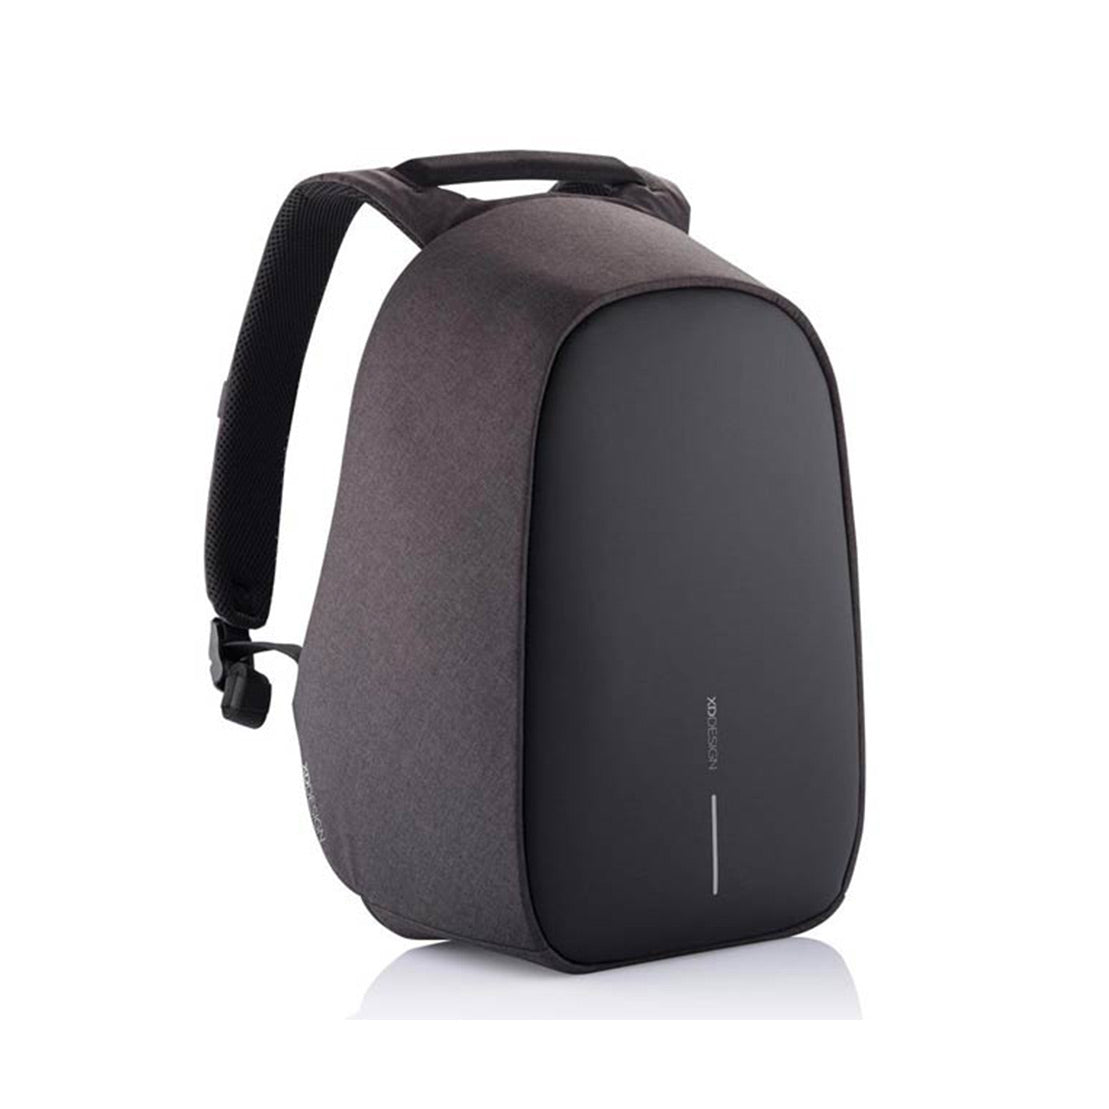 XDDESIGN Aanti Theft Backpack With rPET Material -Black